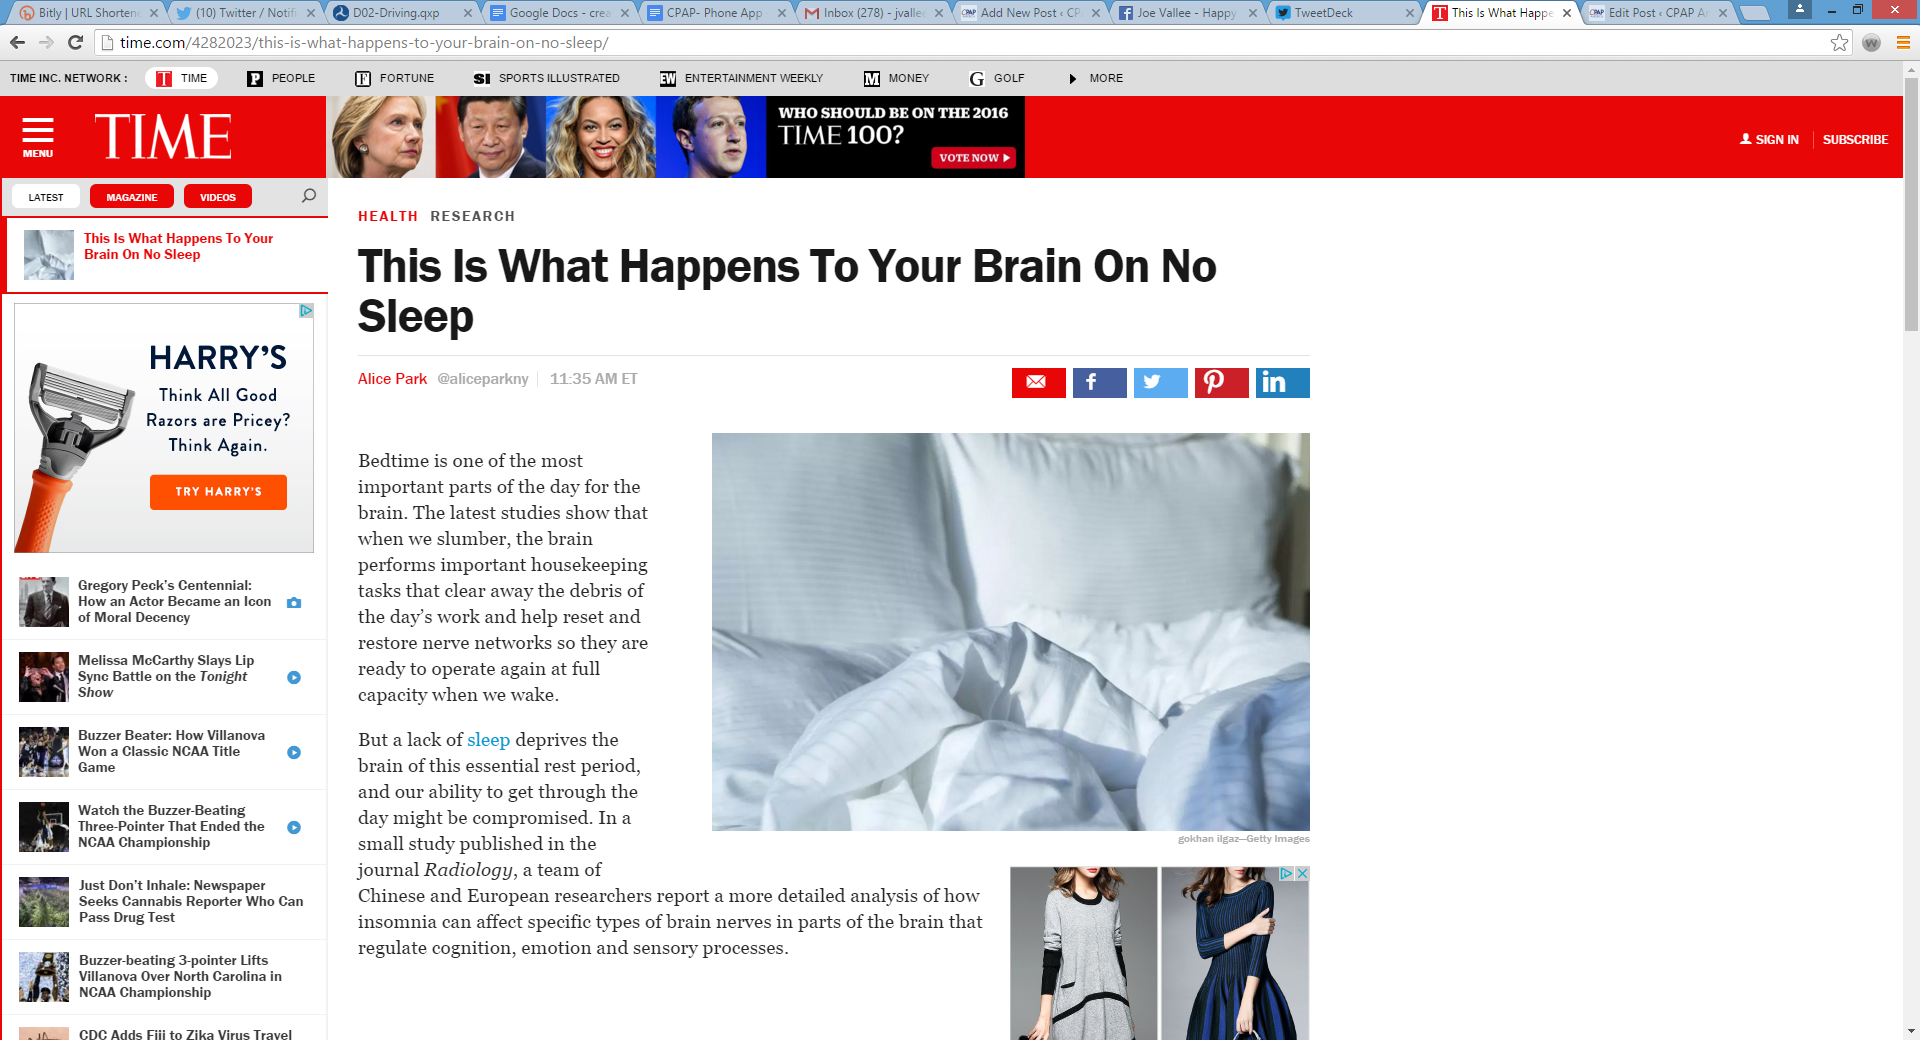 What exactly happens to your brain on no sleep?